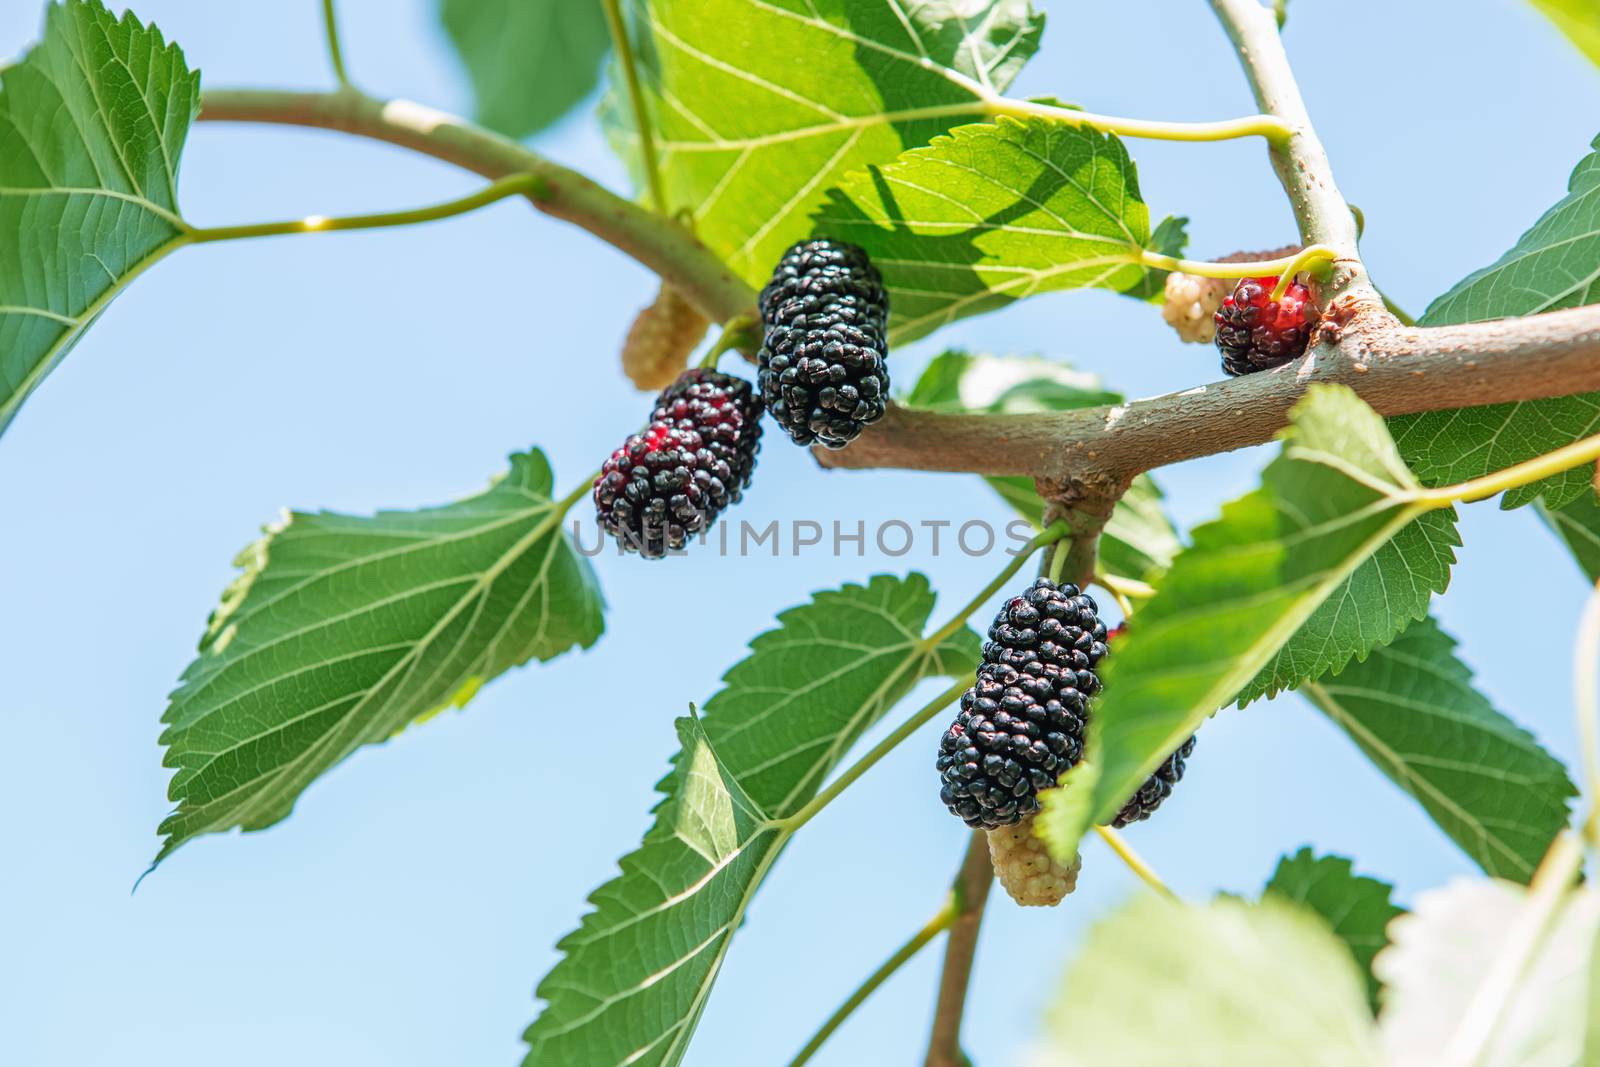 Fresh mulberry, black ripe and red unripe mulberries on the branch.